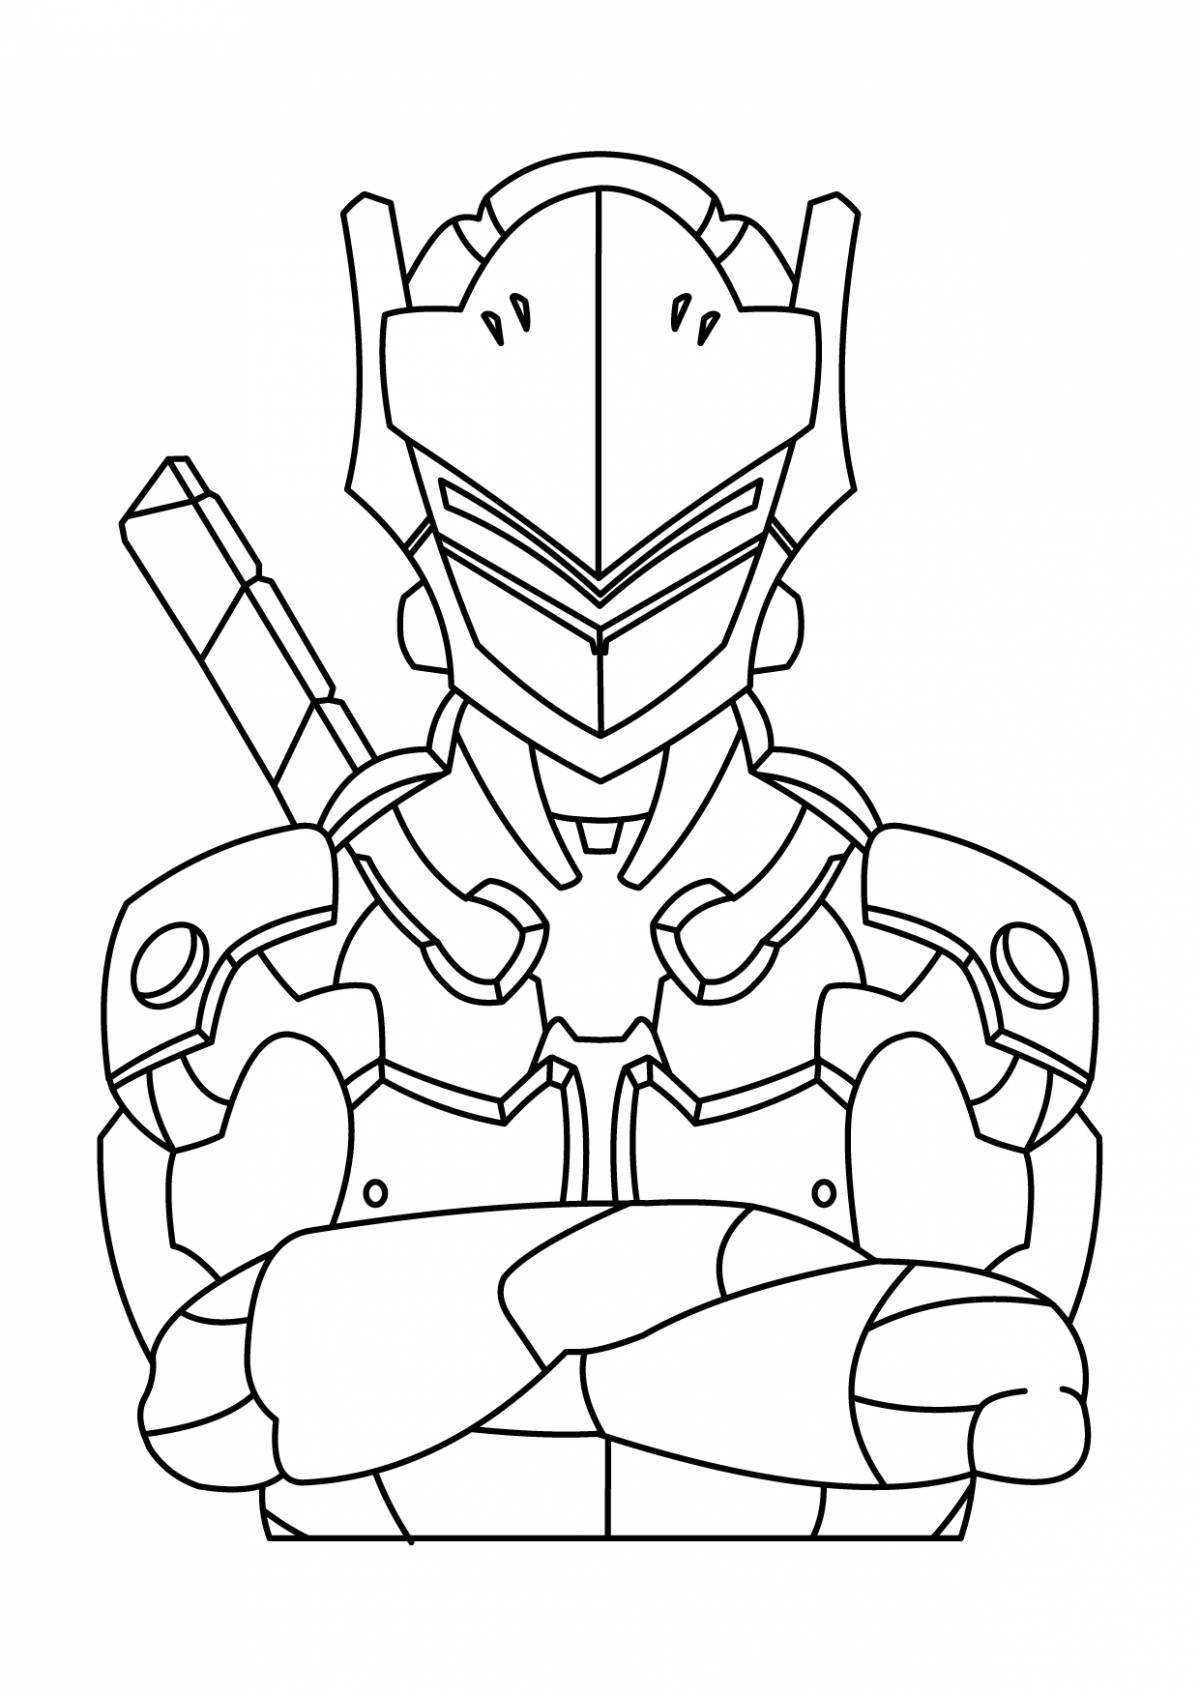 Majestic echo coloring page